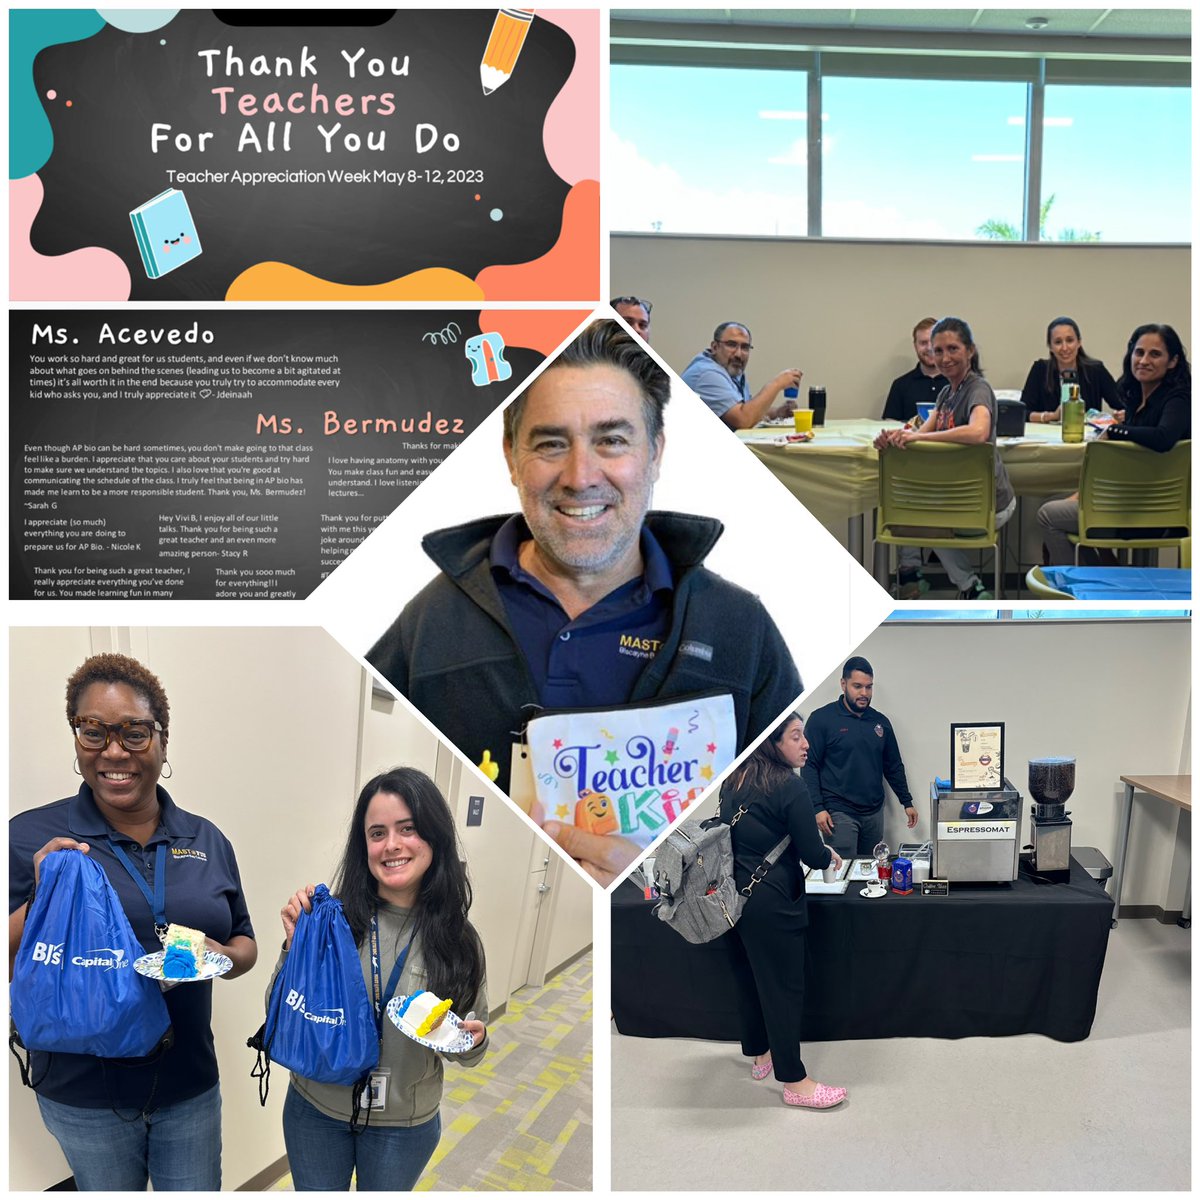 What an amazing week celebrating our teachers @mastfiubbc. Thank you for inspiring students yearlong! A special thanks to @Publix Biscayne Commons @FlanigansFL @Costco @BJsWholesale @TuCafe305 🥳for making it possible!  ♥️ #ConnectandInspireMDCPS